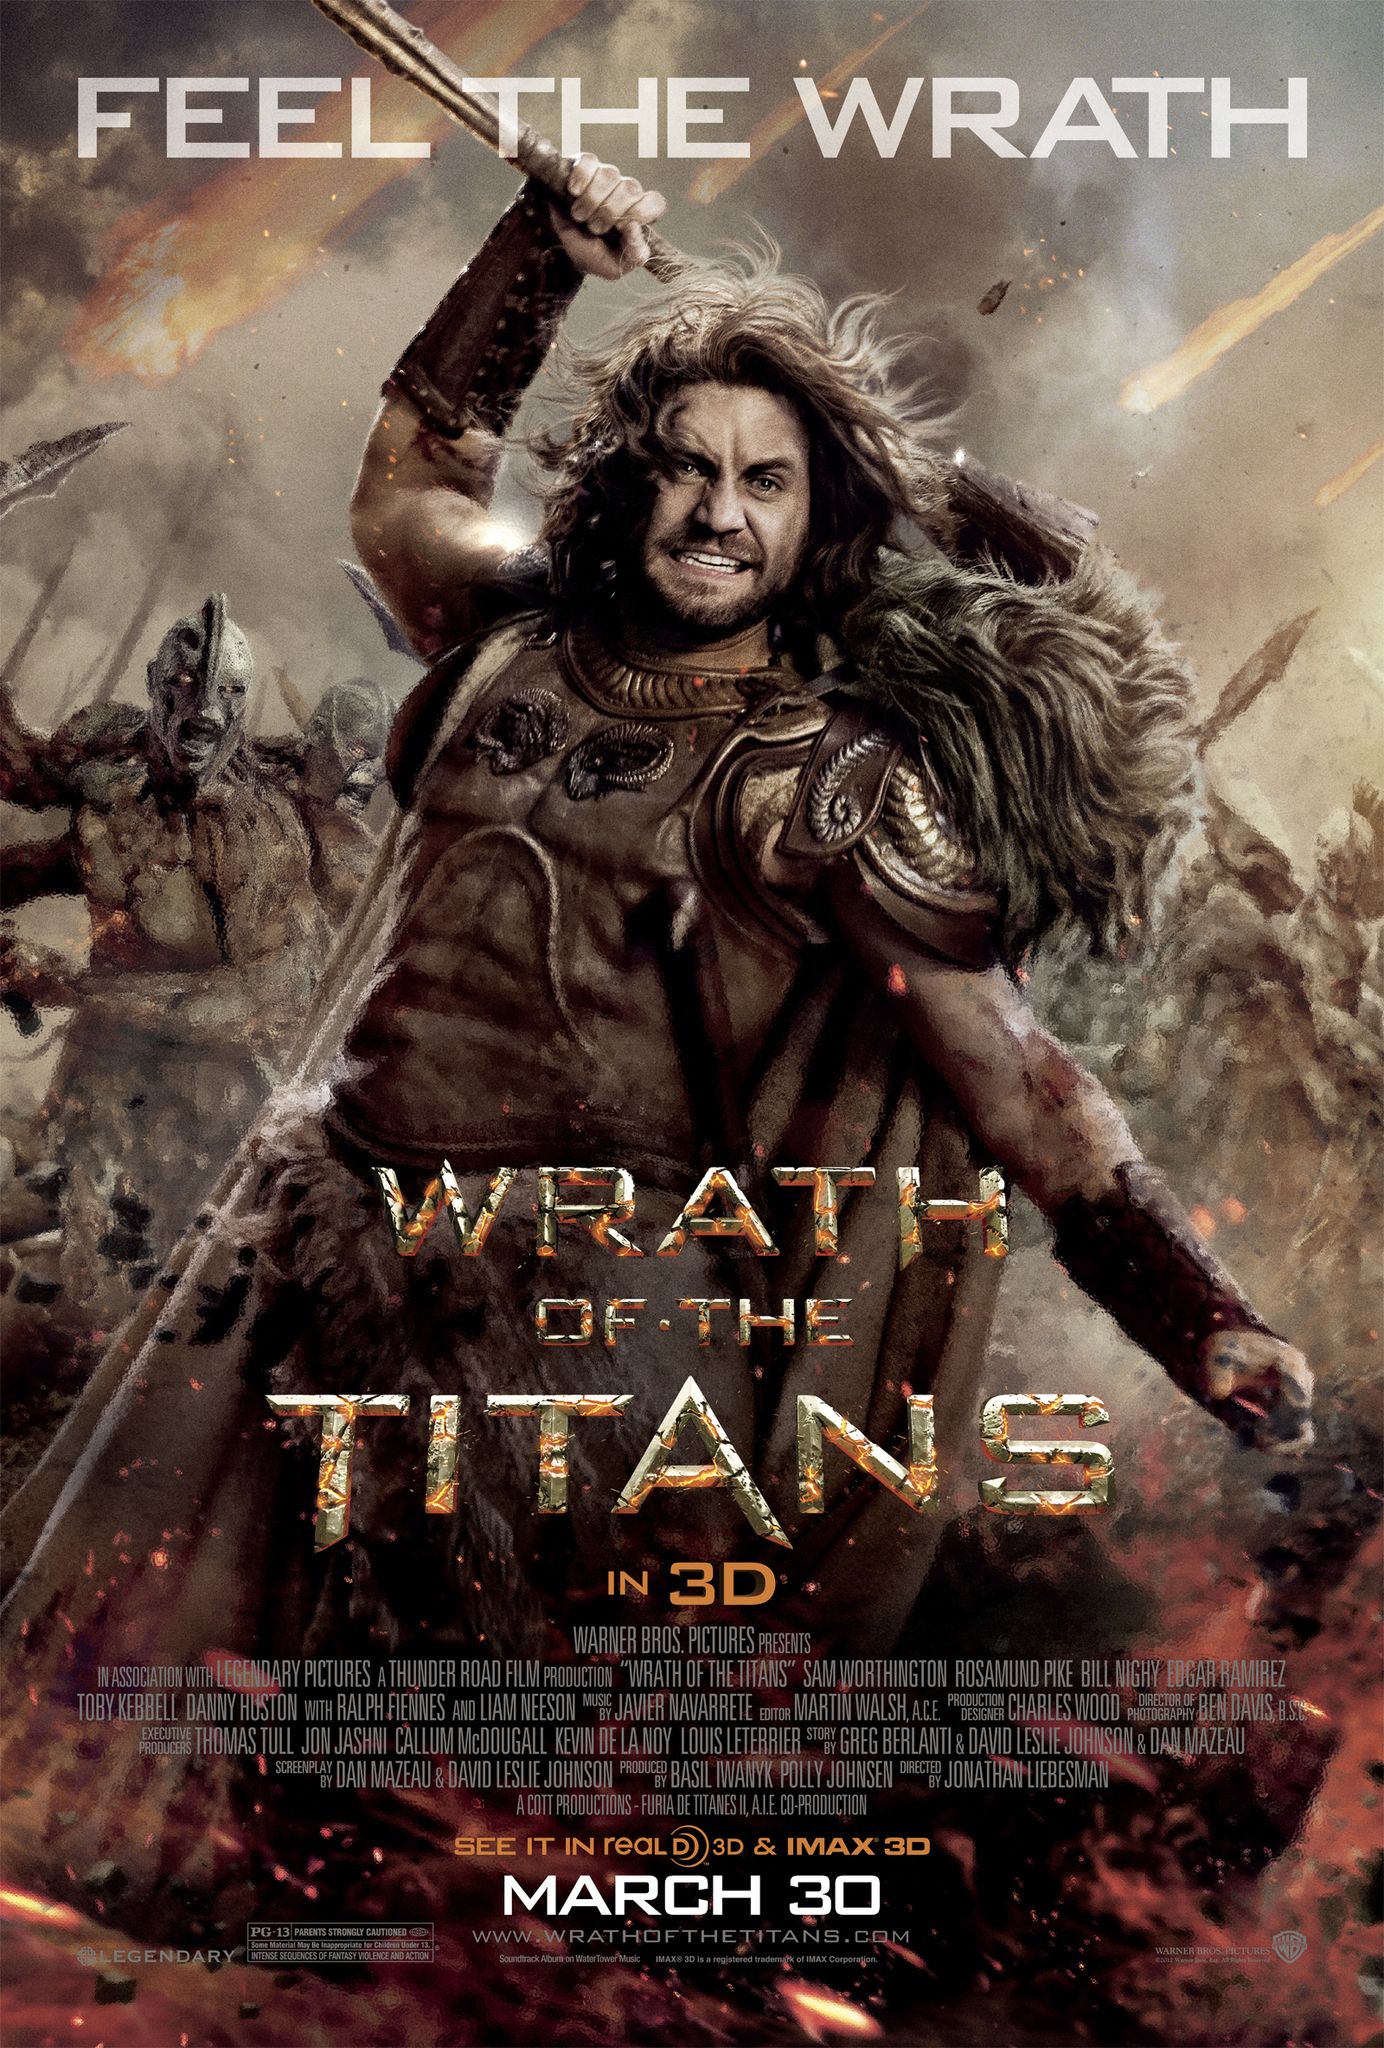 Wrath of the Titans (2012) Hindi Dubbed BluRay download full movie